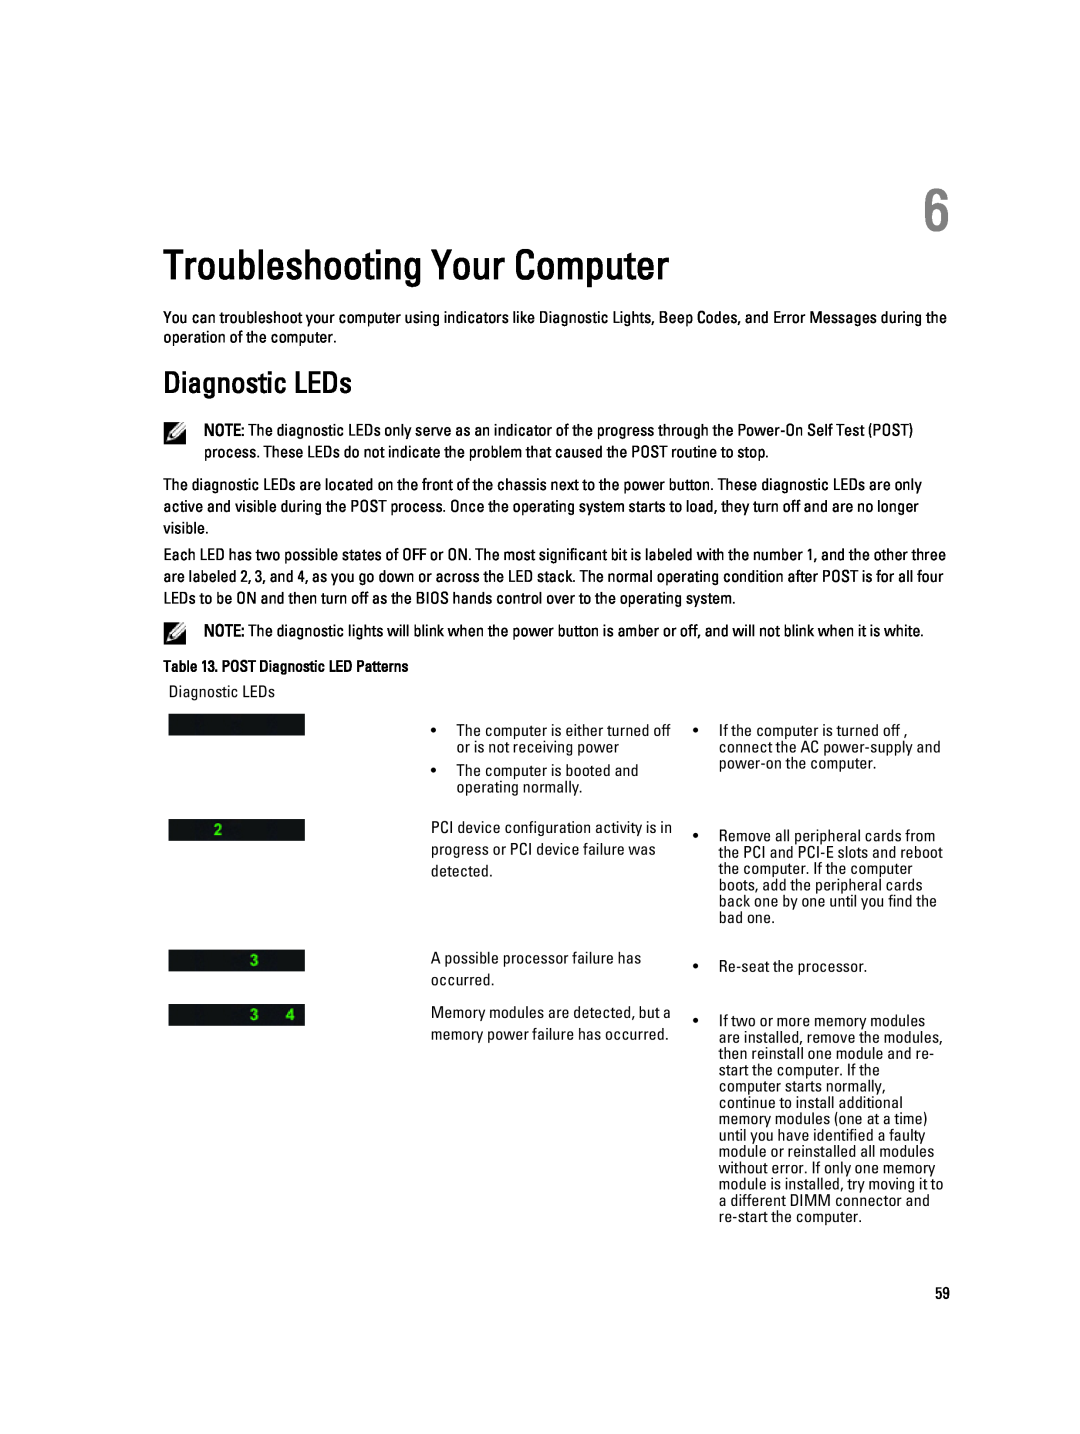 Dell T5610 owner manual Troubleshooting Your Computer, Diagnostic LEDs 